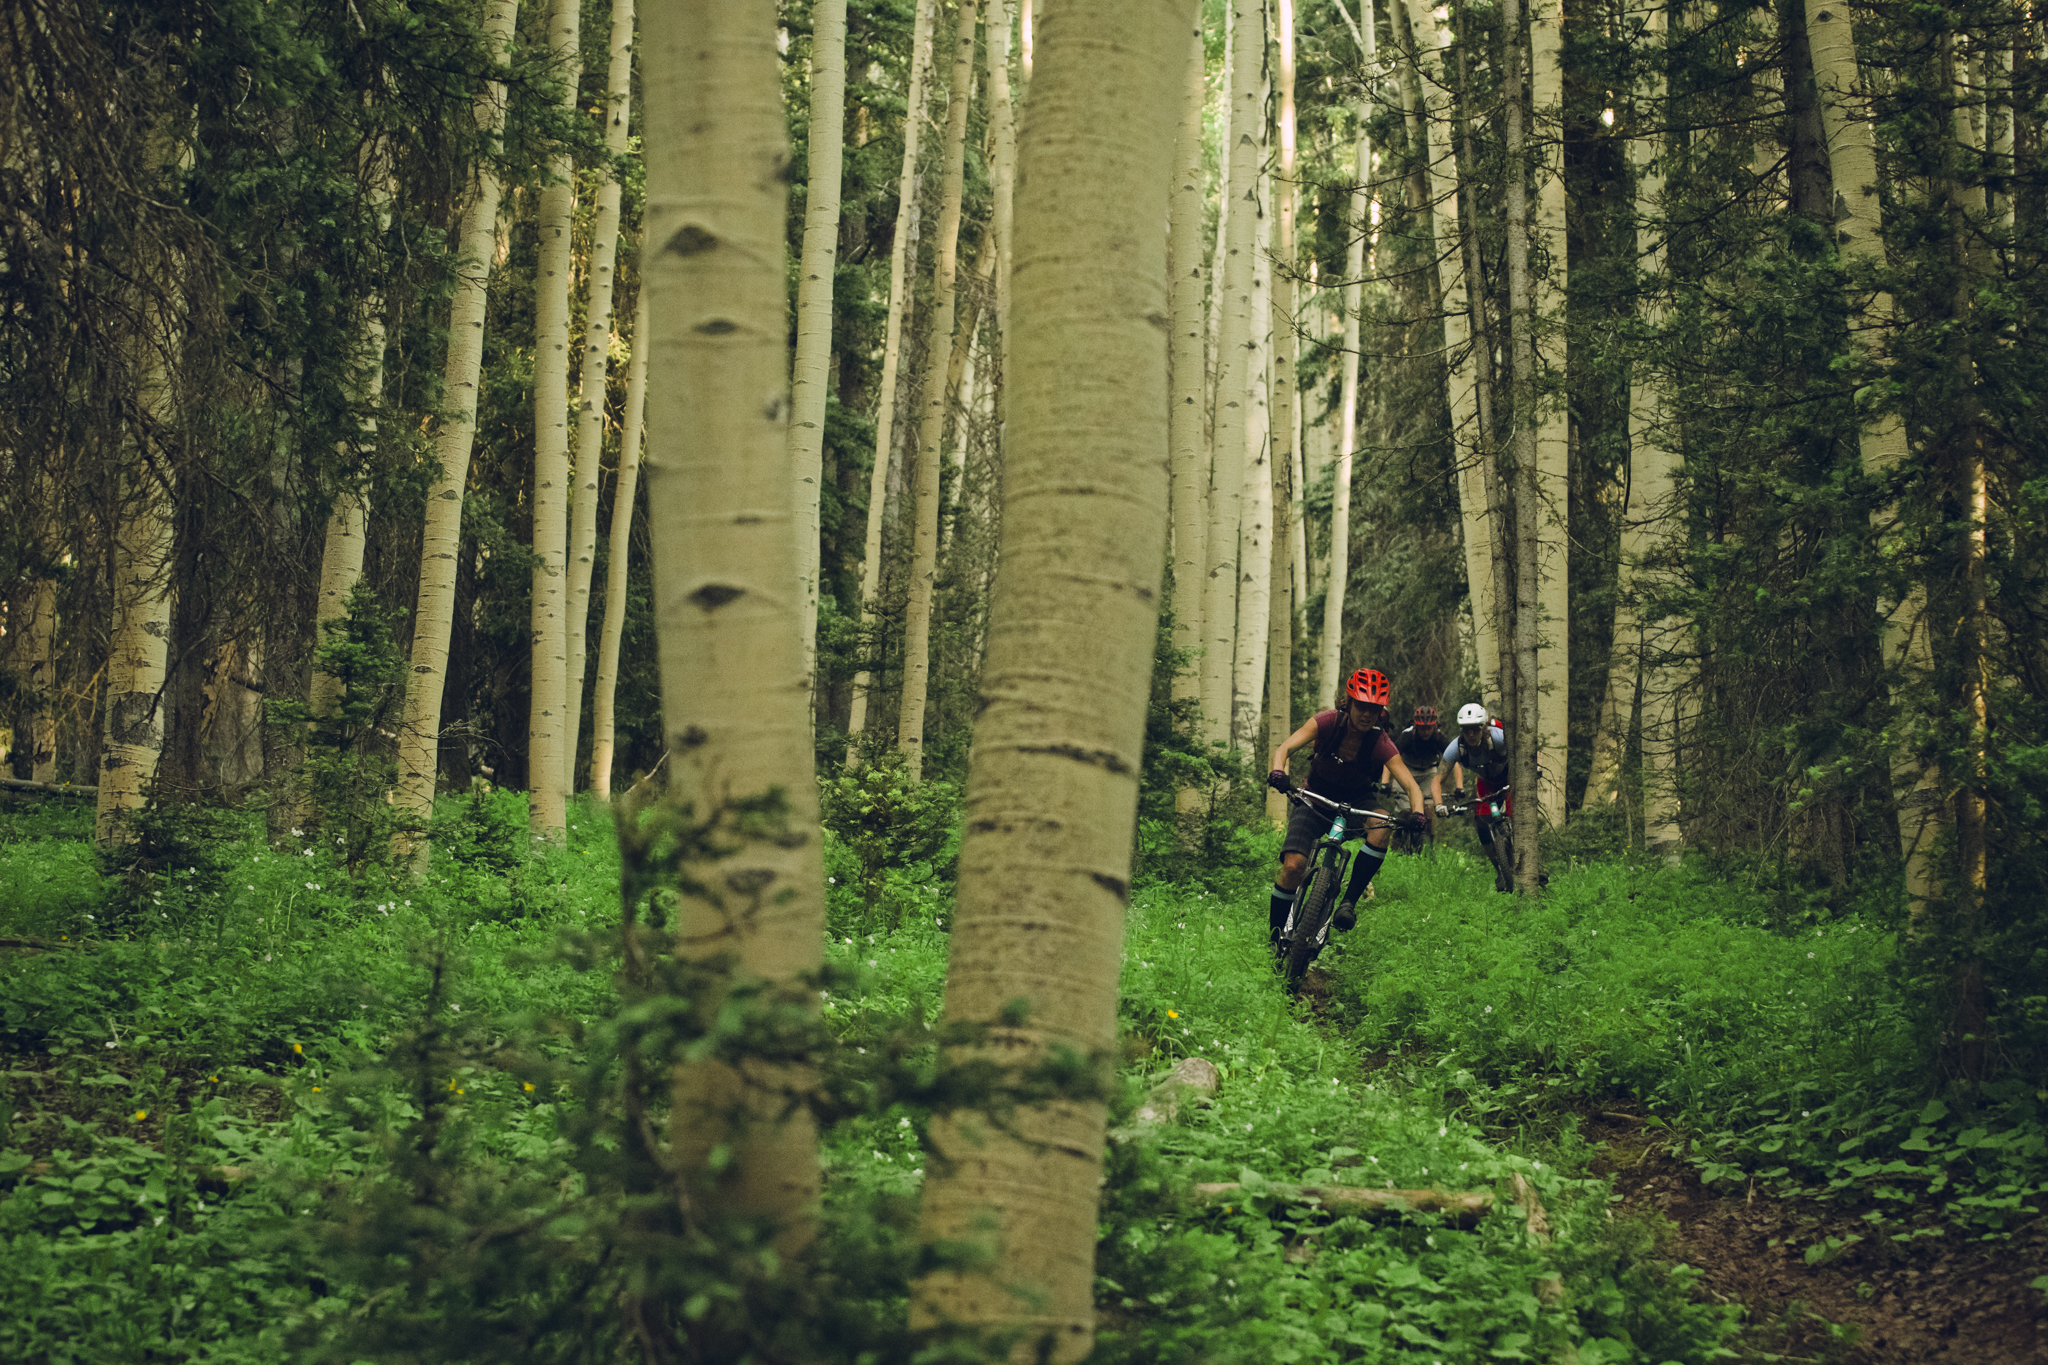 SRAM Stories: One of many – Colorado trail reunion